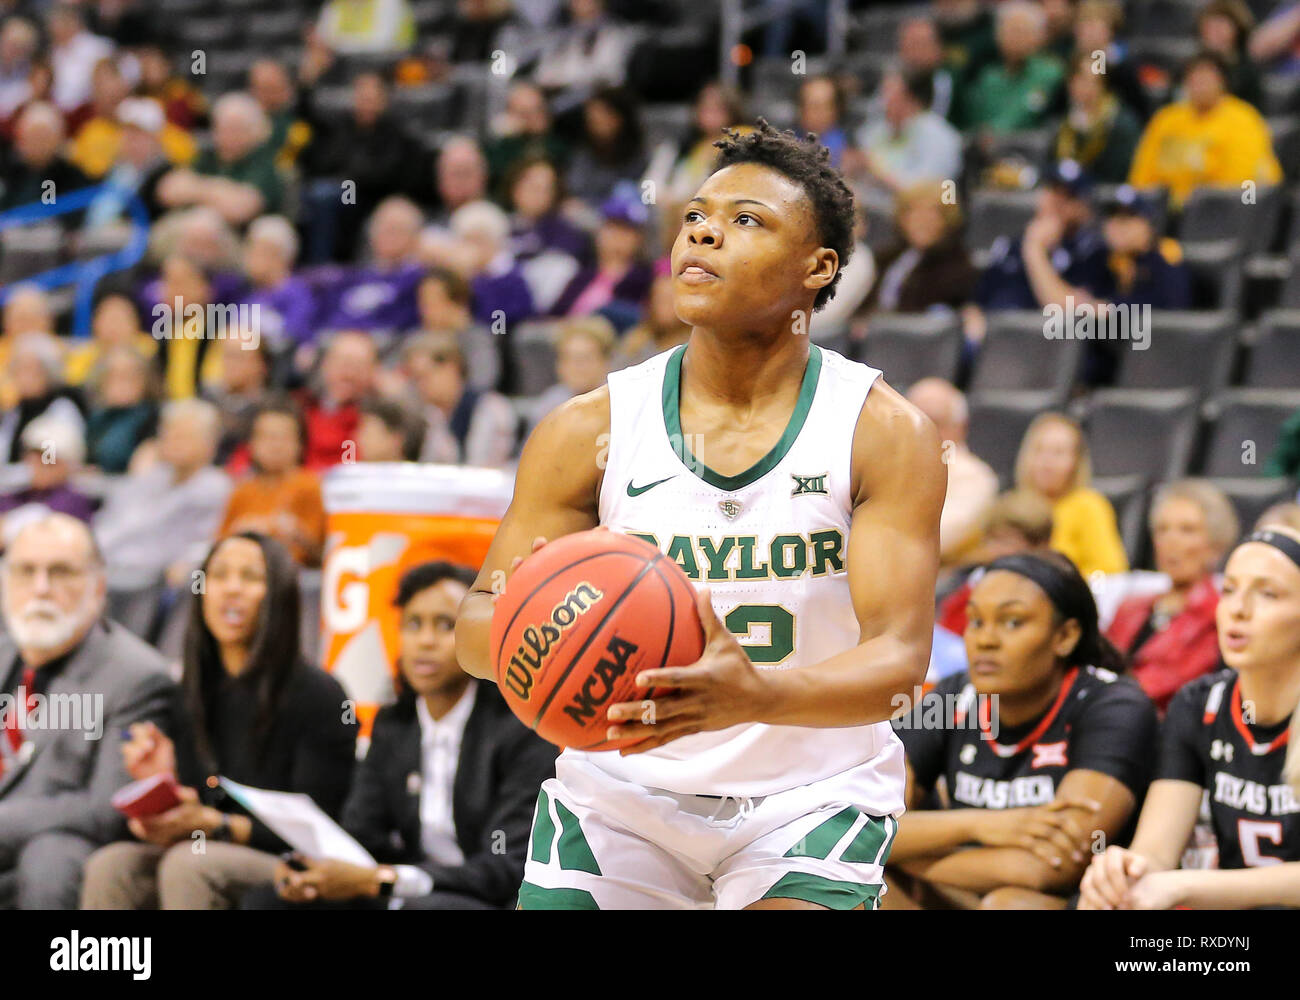 Oklahoma City, OK, USA. 9th Mar, 2019. Baylor Guard Moon Ursin (12) attempts a shot during a Phillips 66 Big 12 Womens Basketball Championship quarterfinal game between the Baylor Lady Bears and the Texas Tech Lady Raiders at Chesapeake Energy Arena in Oklahoma City, OK. Gray Siegel/CSM/Alamy Live News Stock Photo